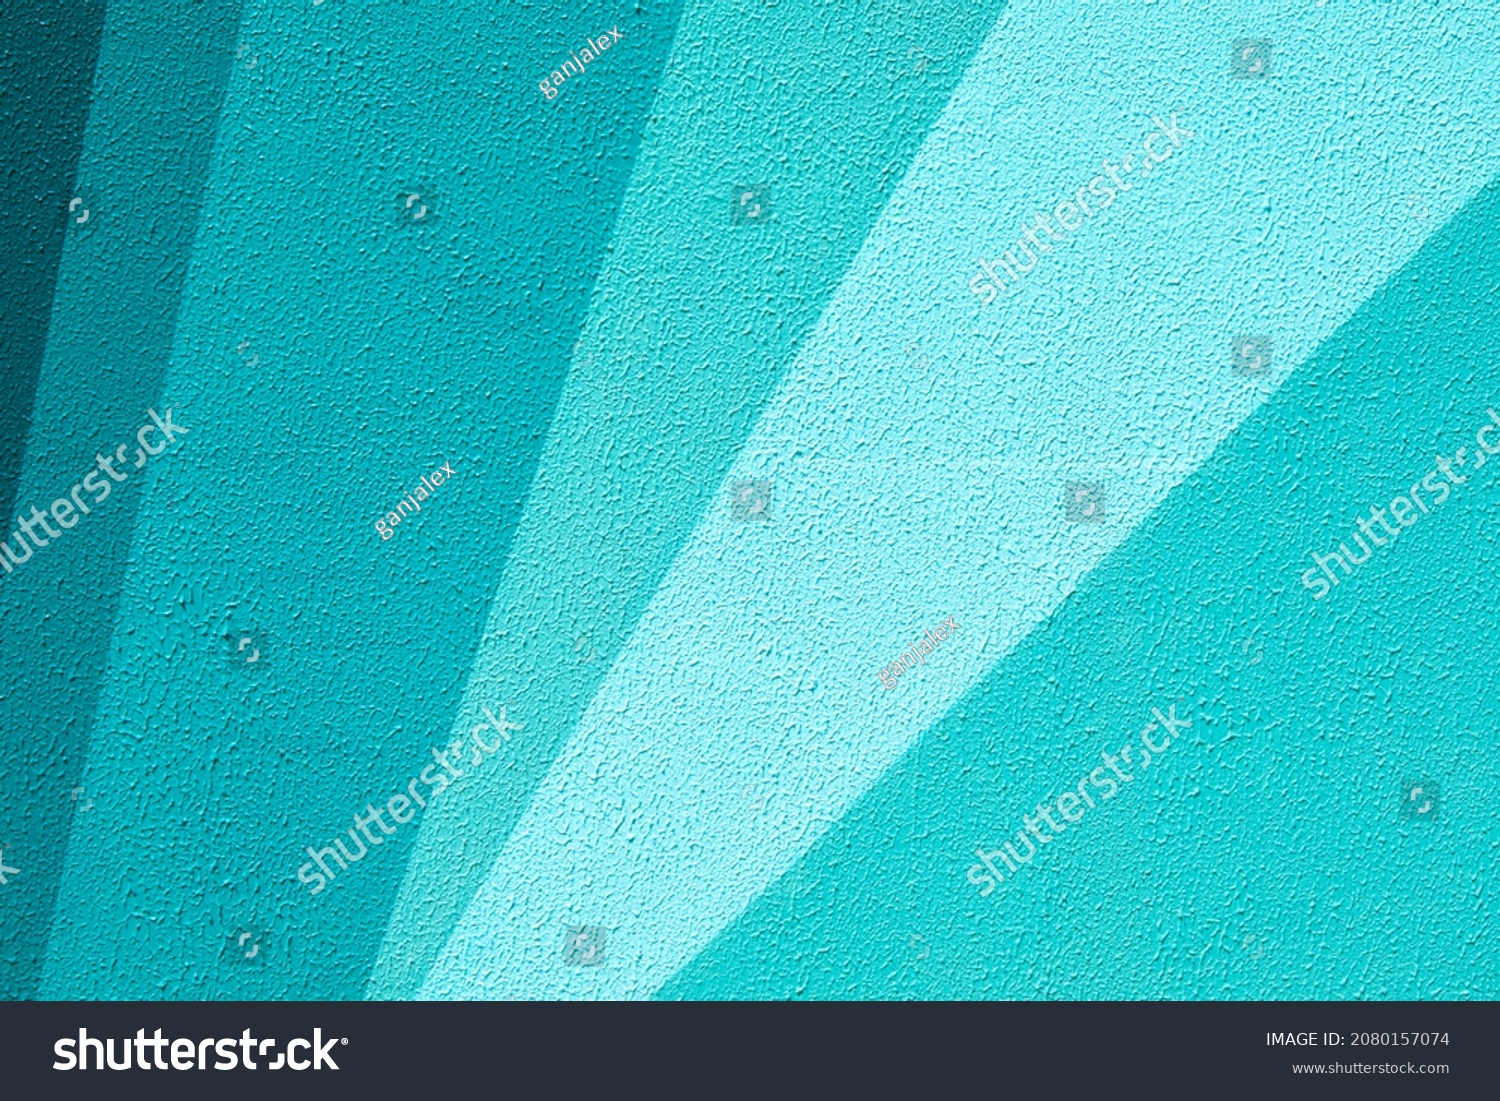 Gradient mint green teal urban wall texture. Modern pattern for wallpaper design. Creative urban city background for advertising mockups. Abstract open composition Minimal geometric style solid colors #2080157074